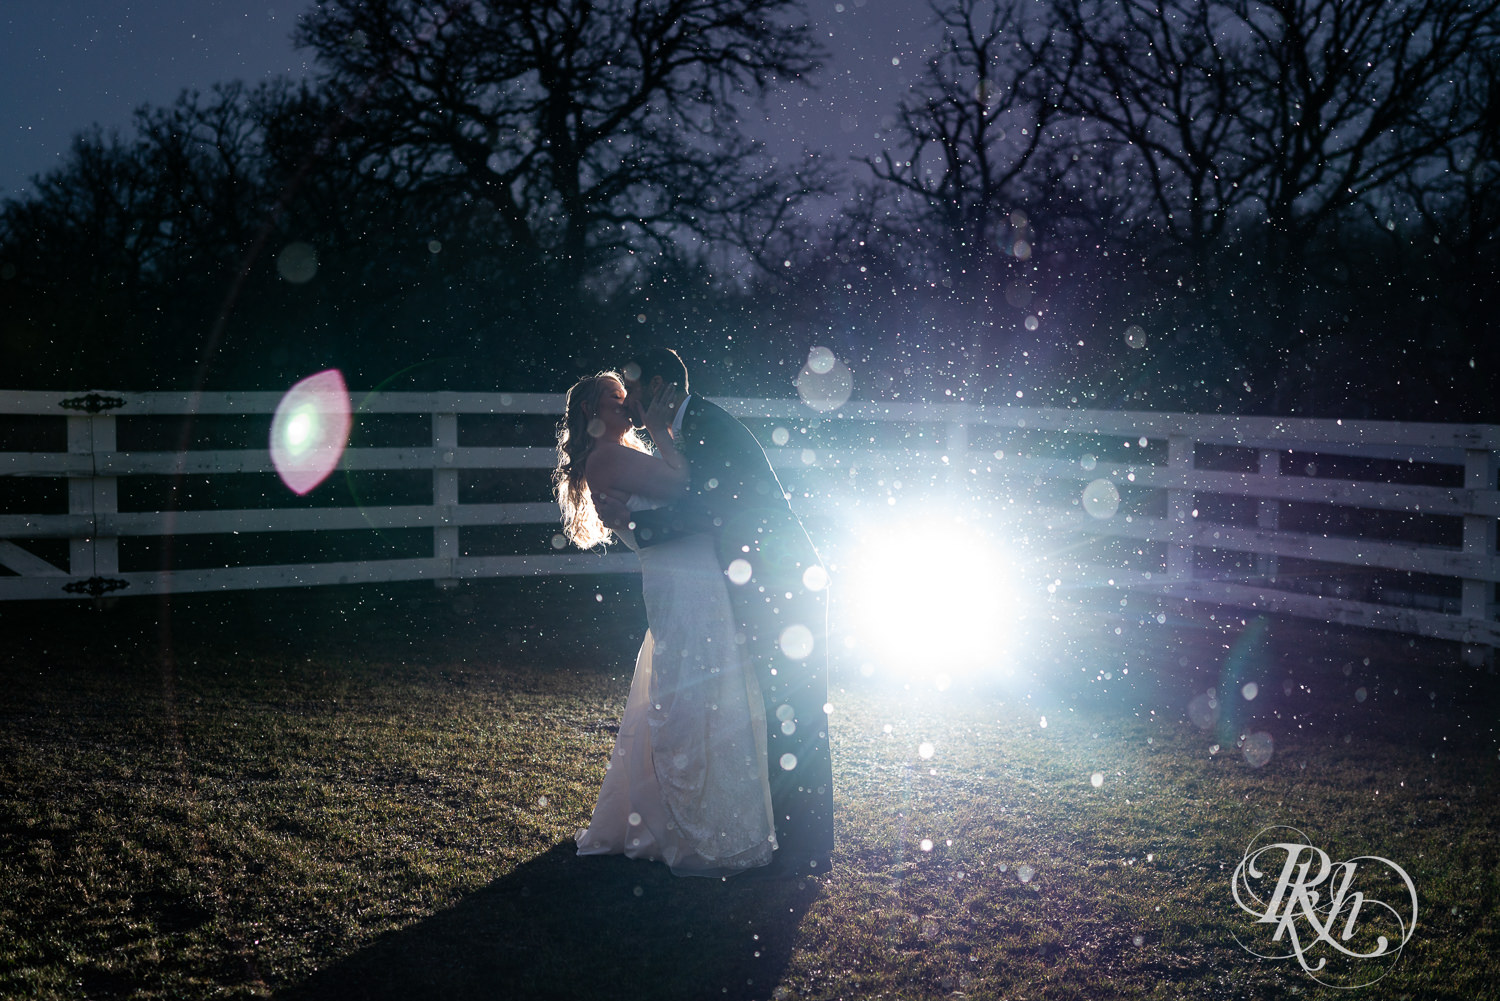 Bride and groom kiss at night in the falling snow at winter wedding at Almquist Farm in Hastings, Minnesota.